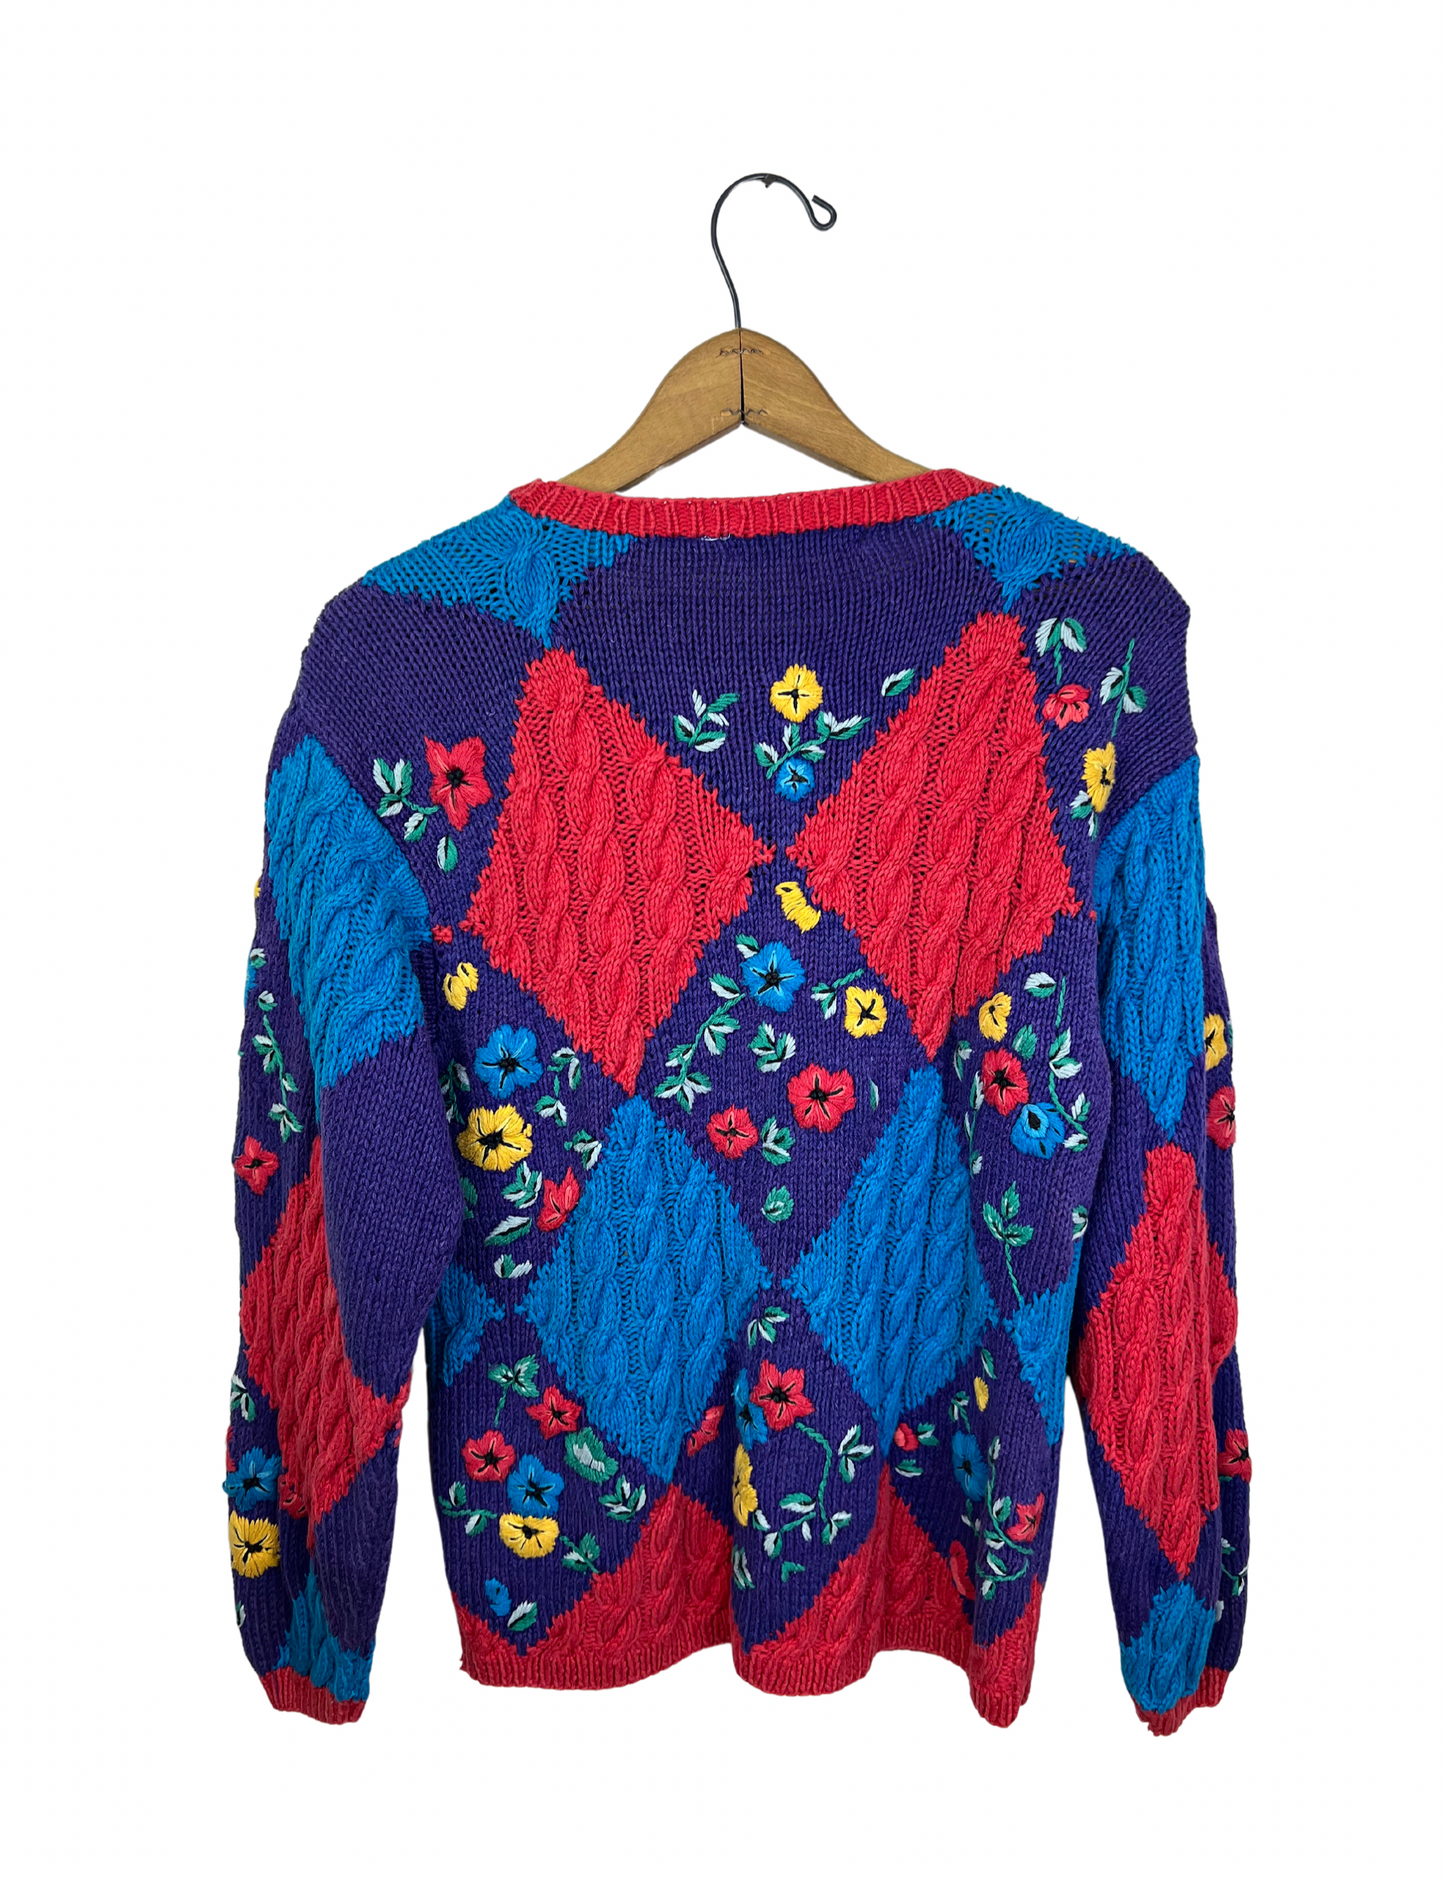 90’s Chunky Diamond Colorful Floral Cable Knit Sweater